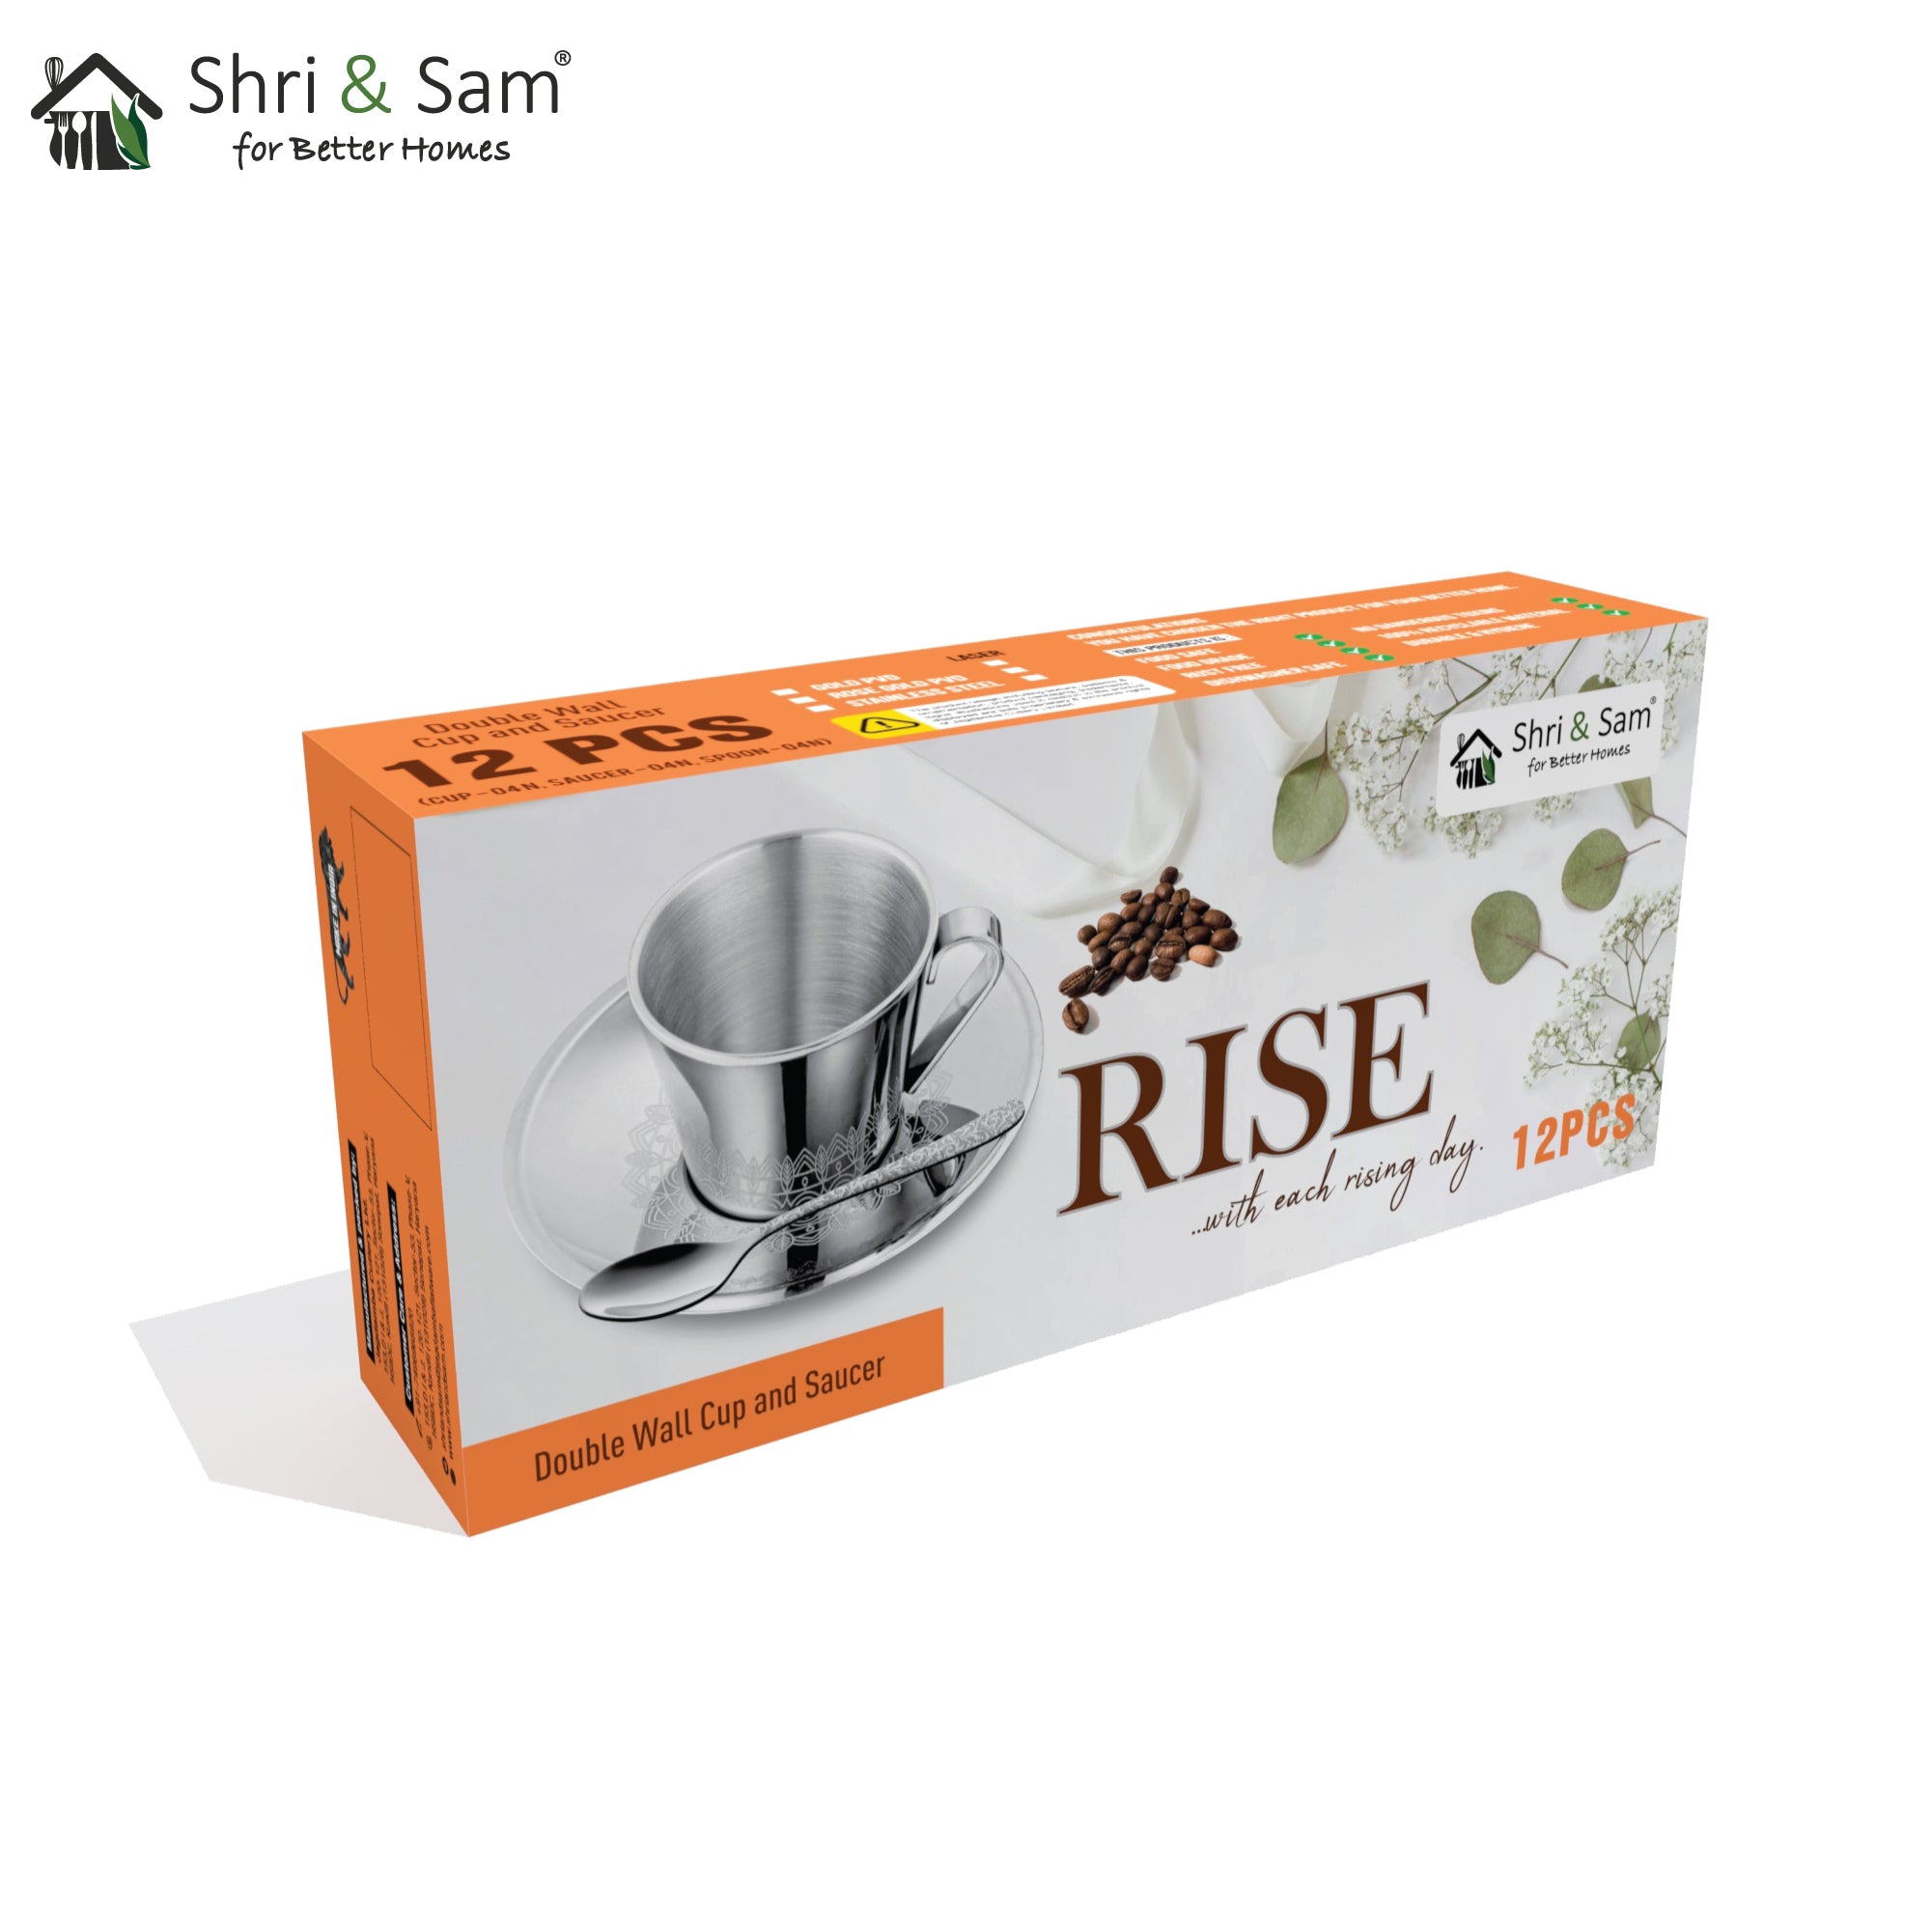 Stainless Steel 4 PCS Double Wall Cup and Saucer with Laser Rise